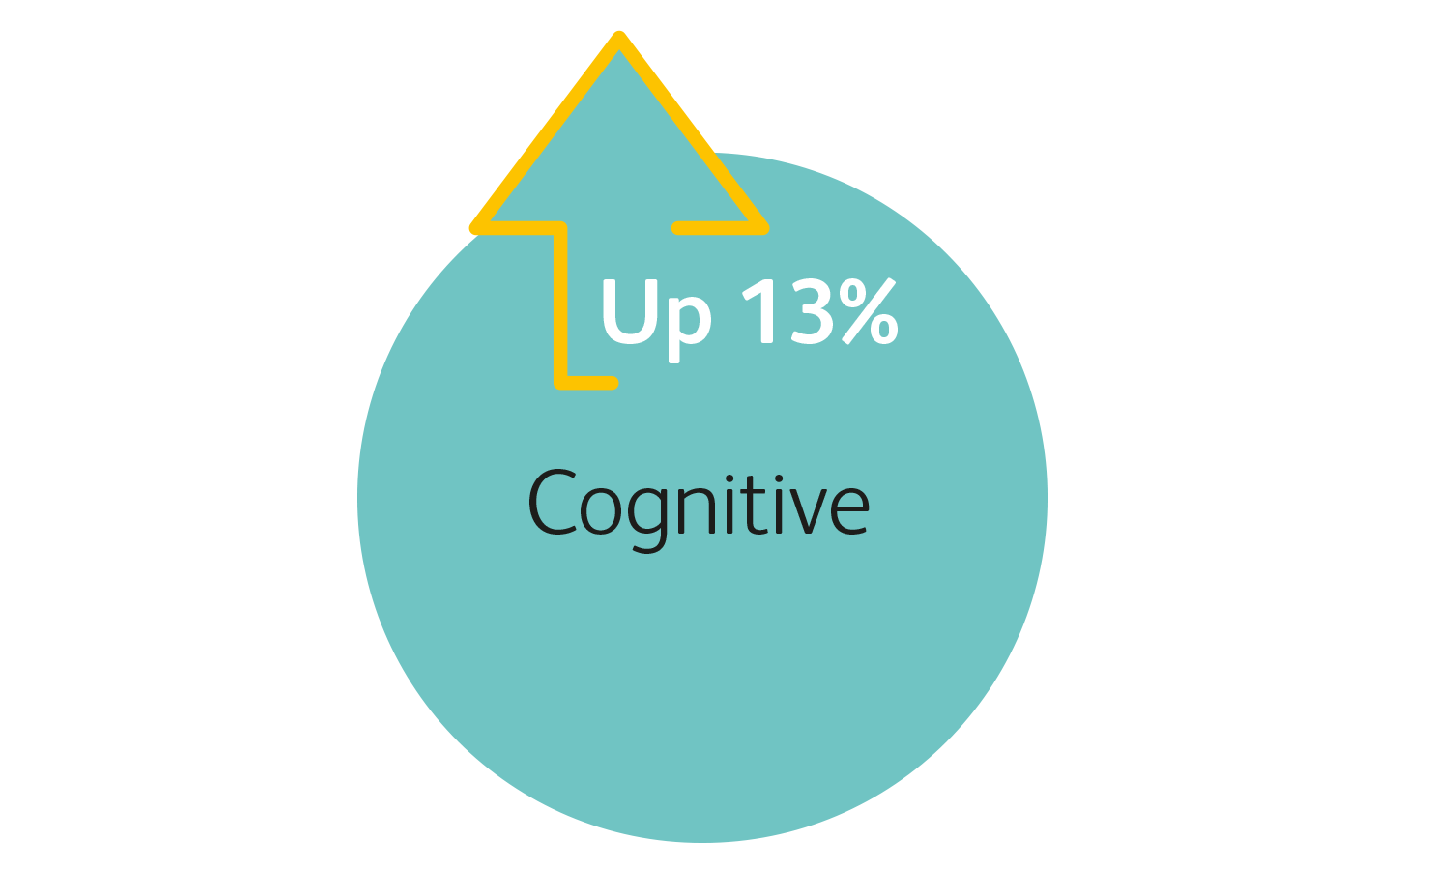 up 13% Cognitive